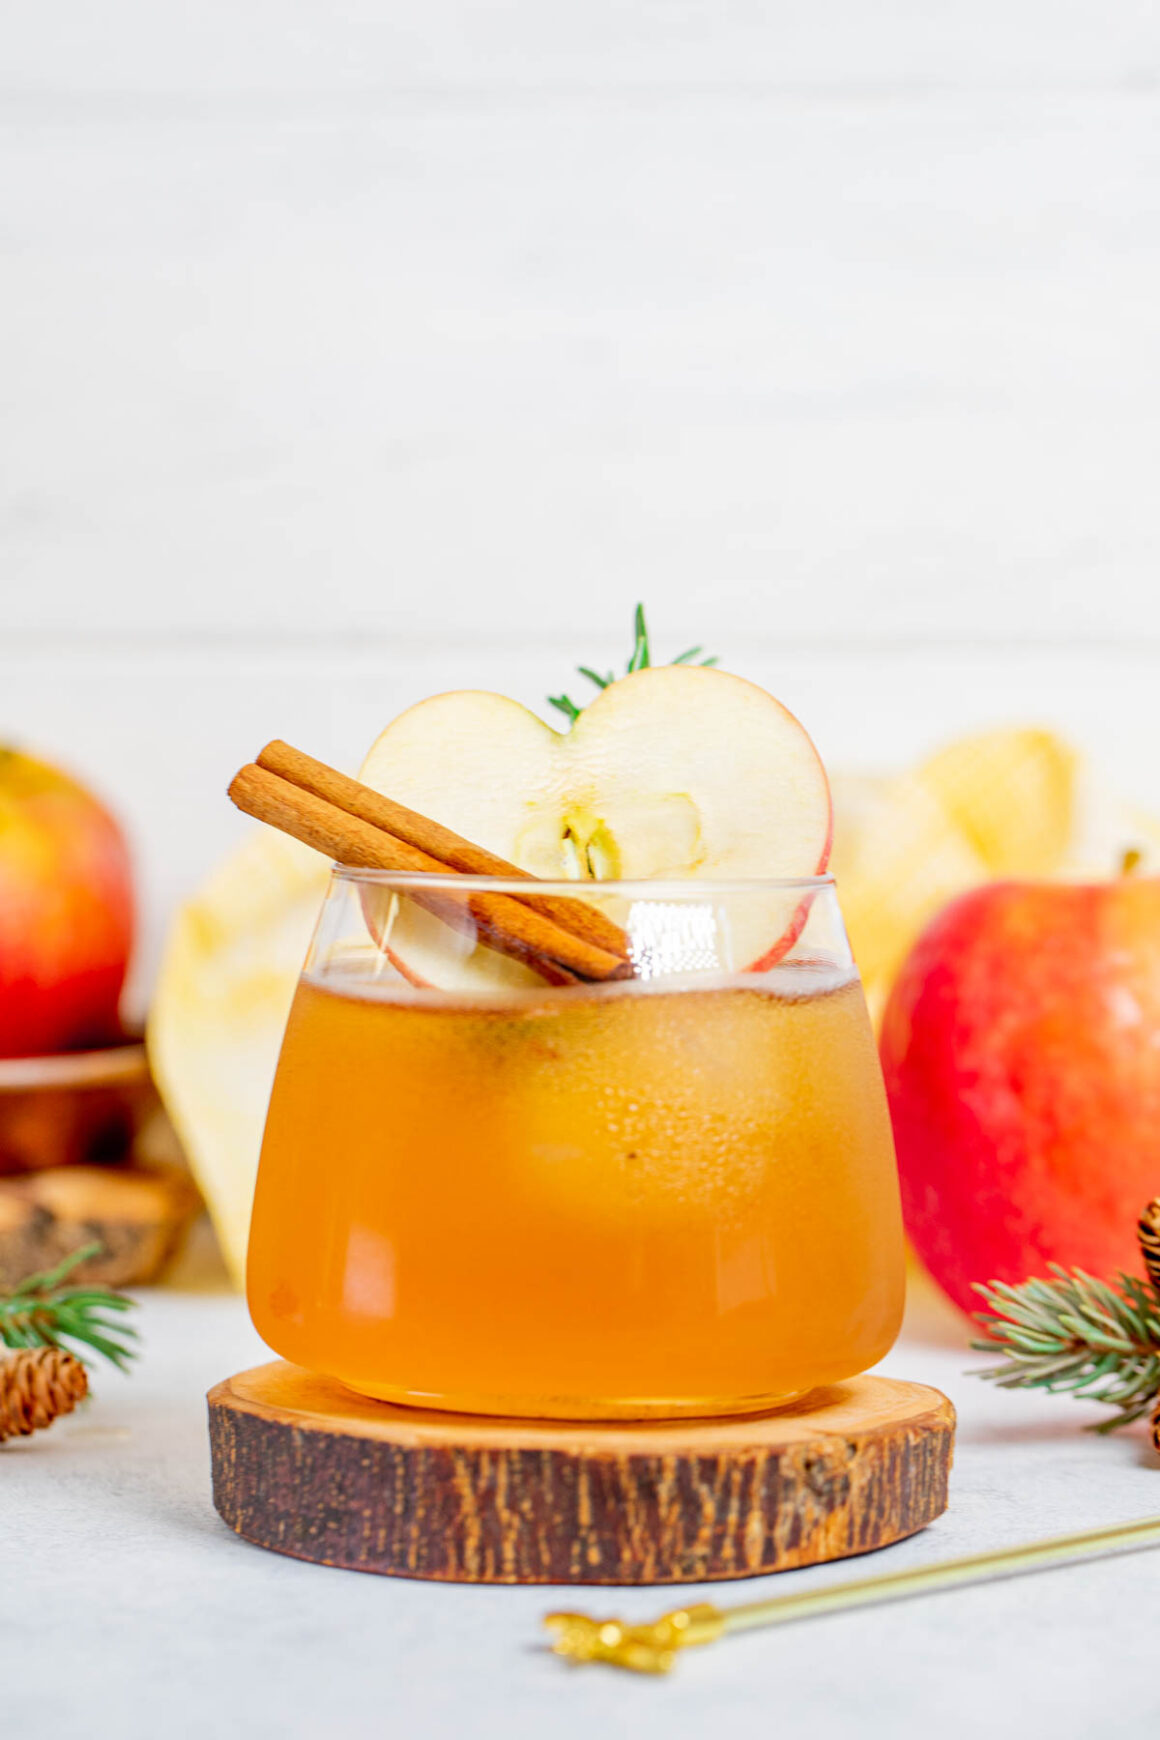 Combining these ingredients requires careful execution to achieve the perfect Apple Harvest Delight.